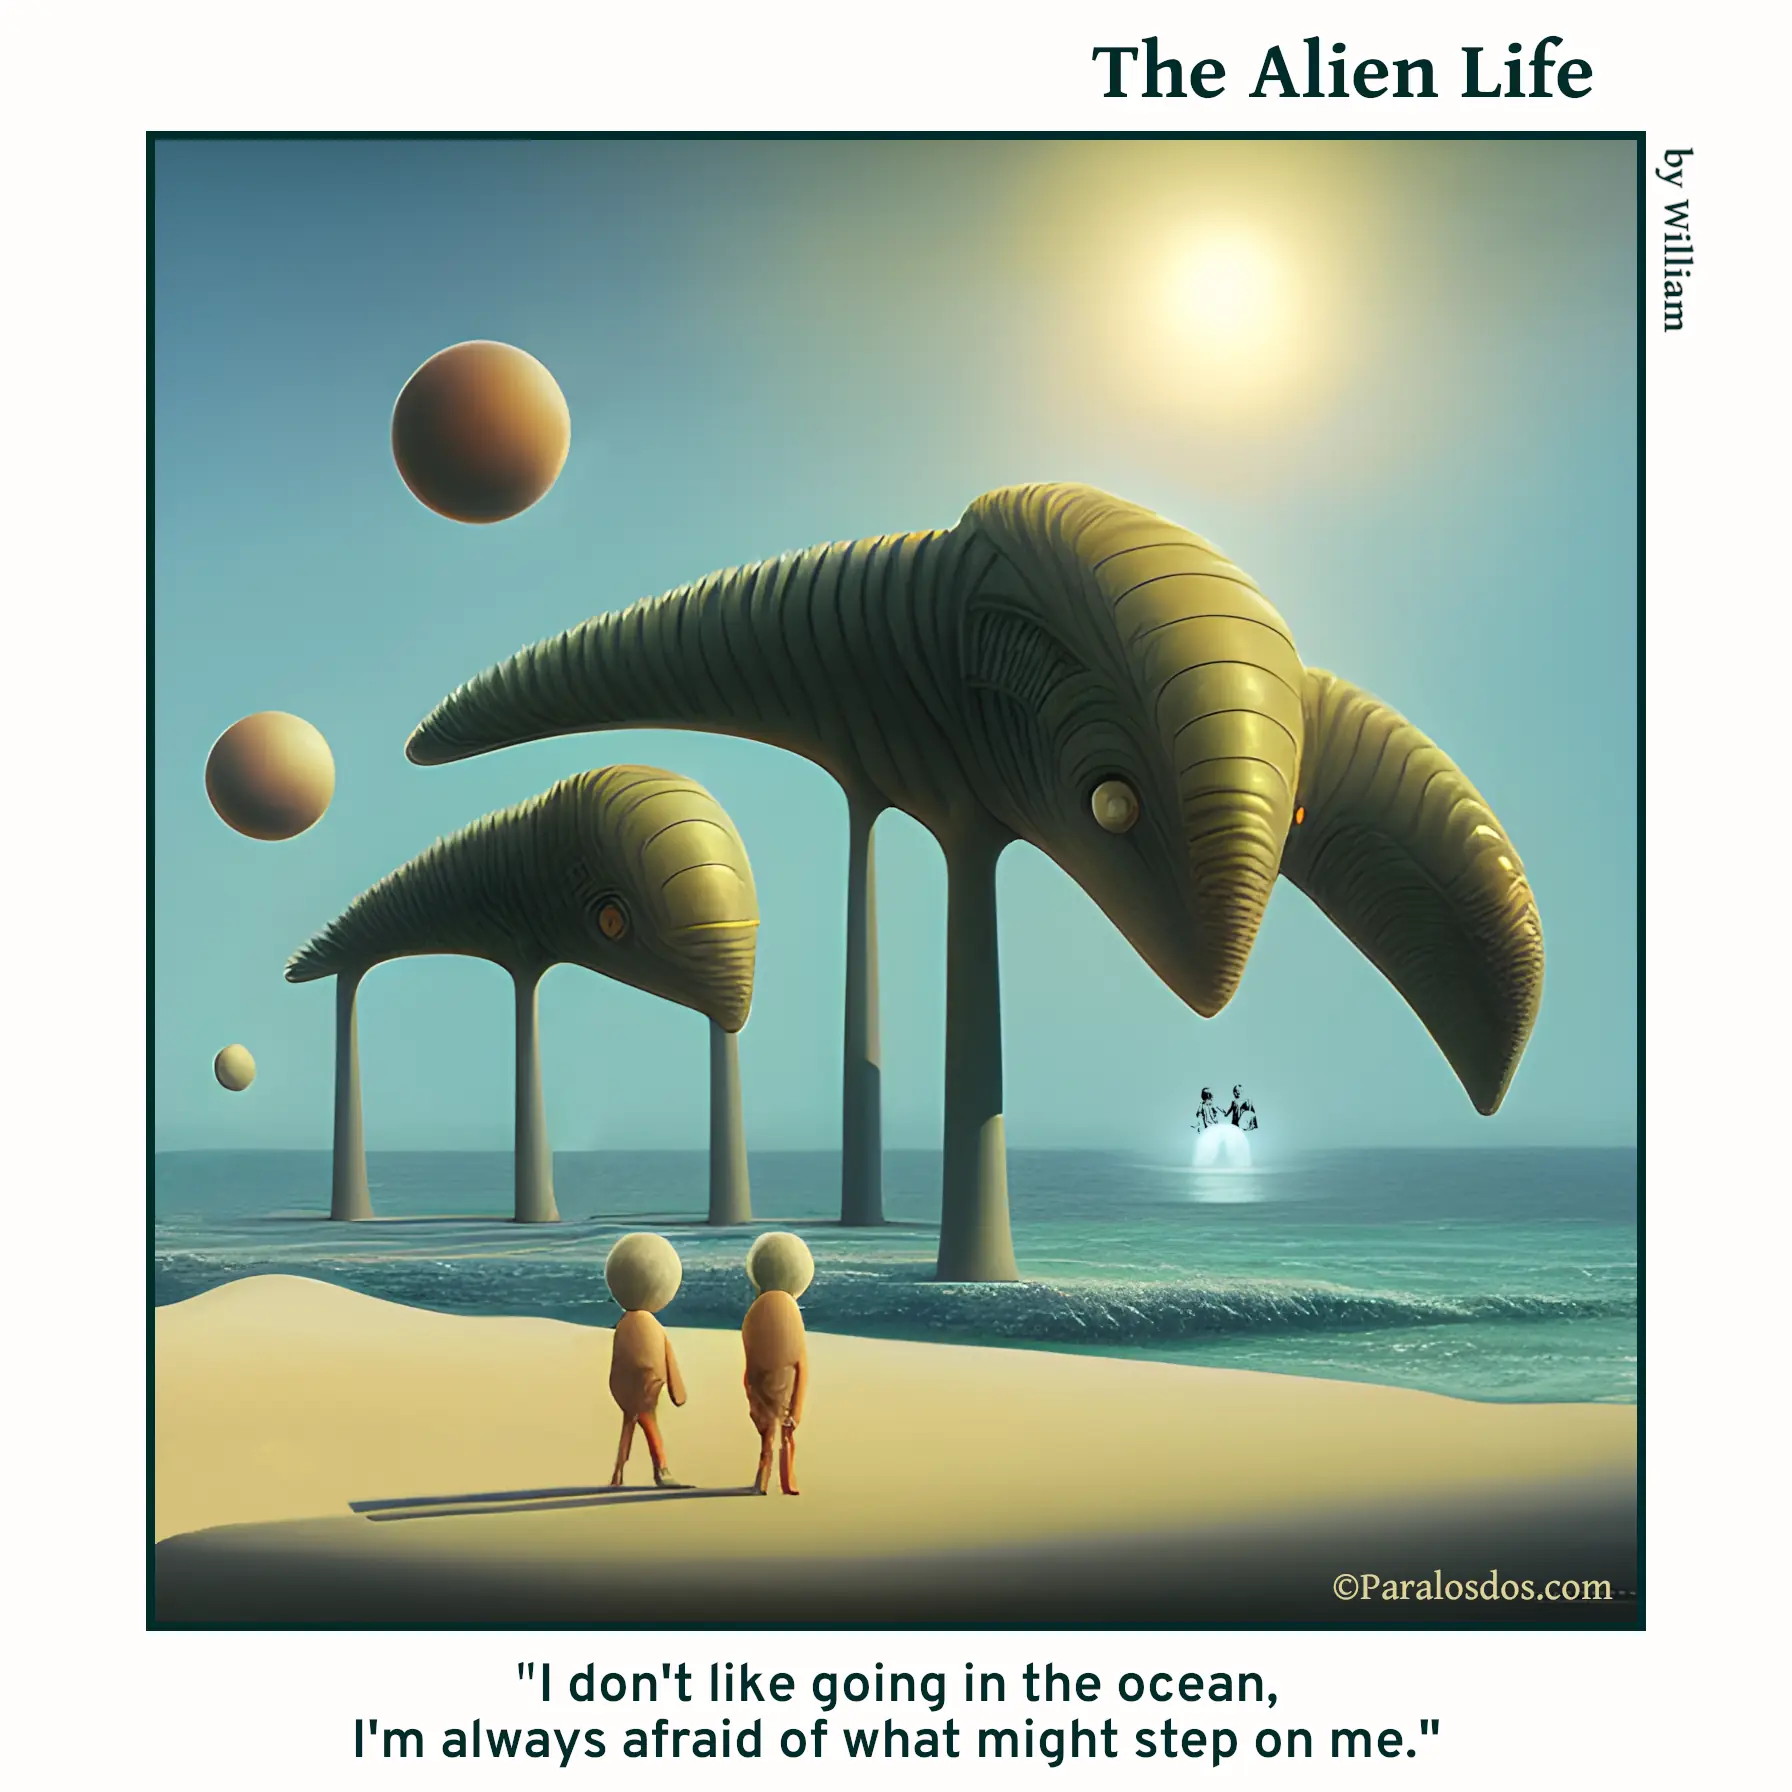 The Alien Life, one panel Comic. Two aliens are standing on the beach. Giant weird creatures are in the water in front of the aliens. The caption reads: " I don't like going in the ocean, I'm always afraid of what might step on me."